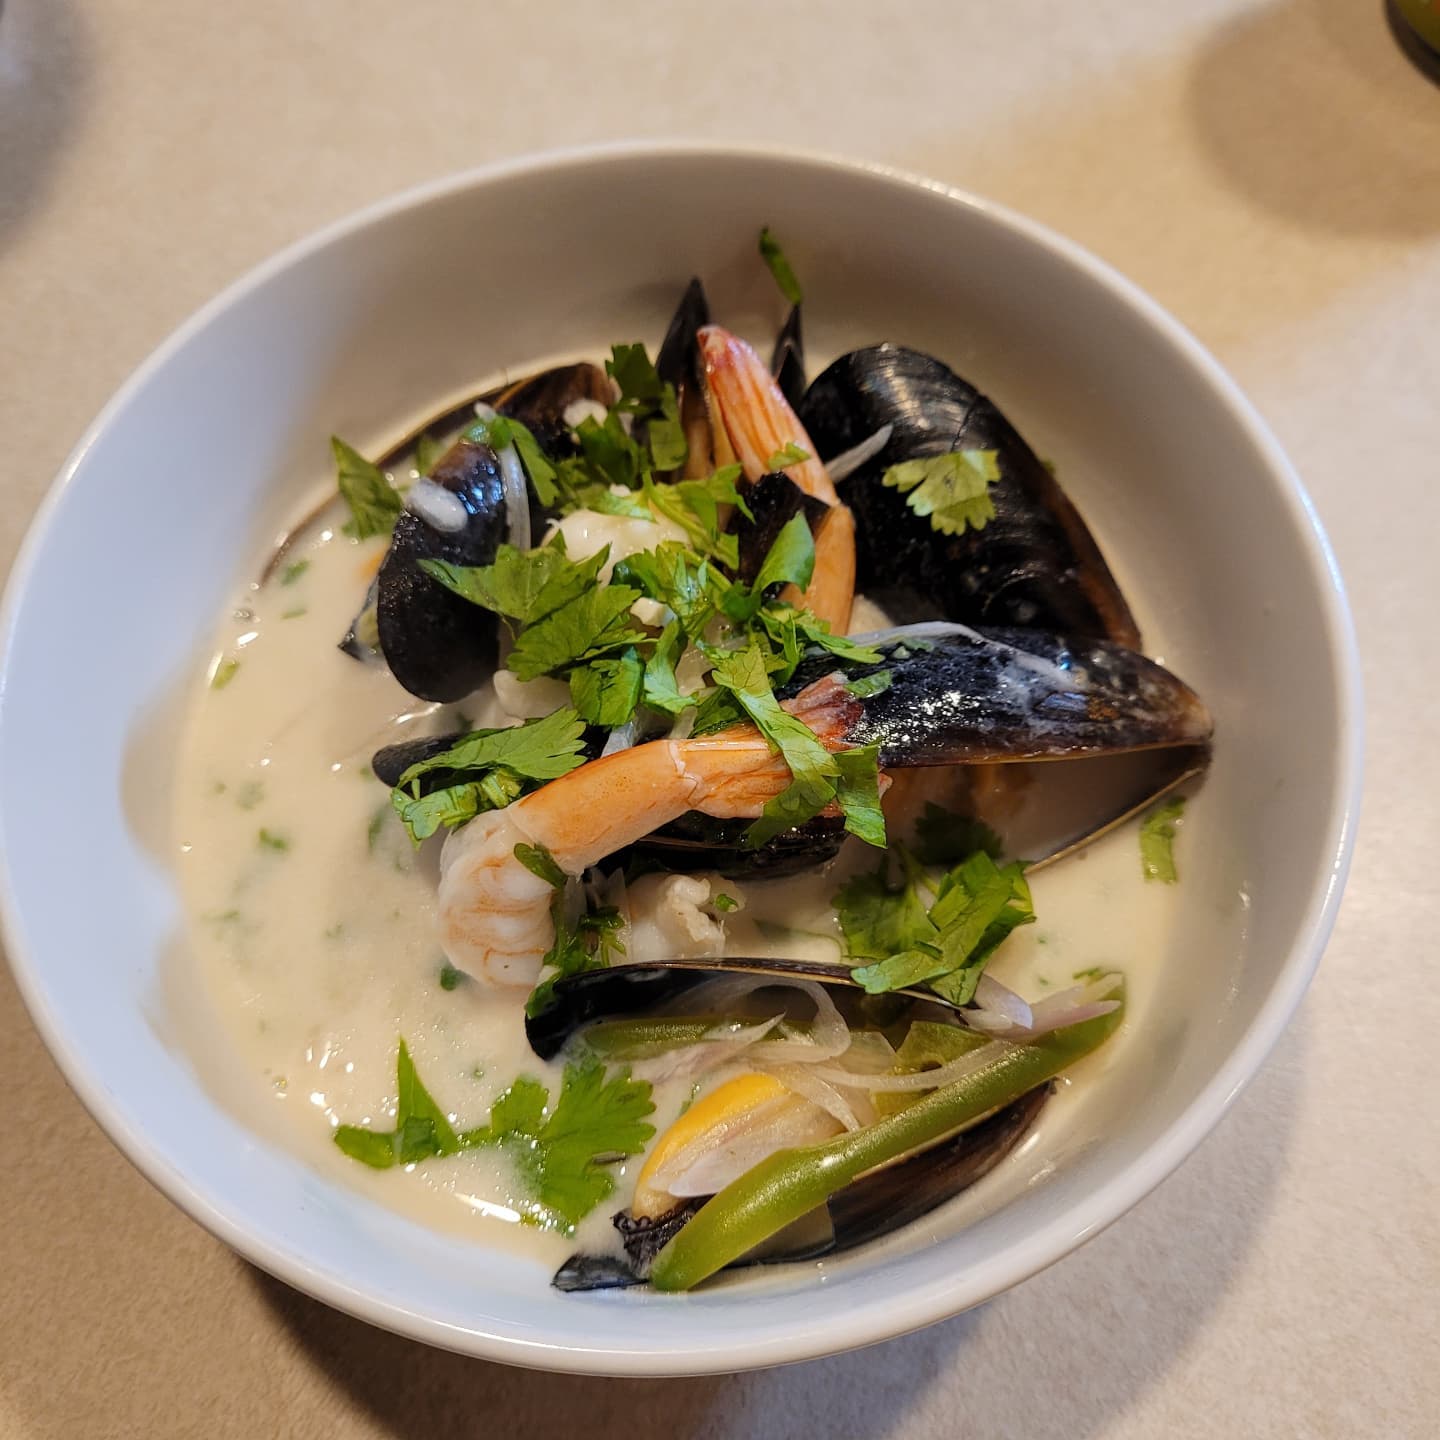 We made @gordongram 's mussels with coconut milk, chilis, and cilantro last night from the @hellskitchenfox cookbook with an added twist of shrimp. SO. GOOD. I couldn't slurp up enough of the broth!

#dinner #hellskitchen #cookbook #seafood #yummy #delish #nofilterneeded